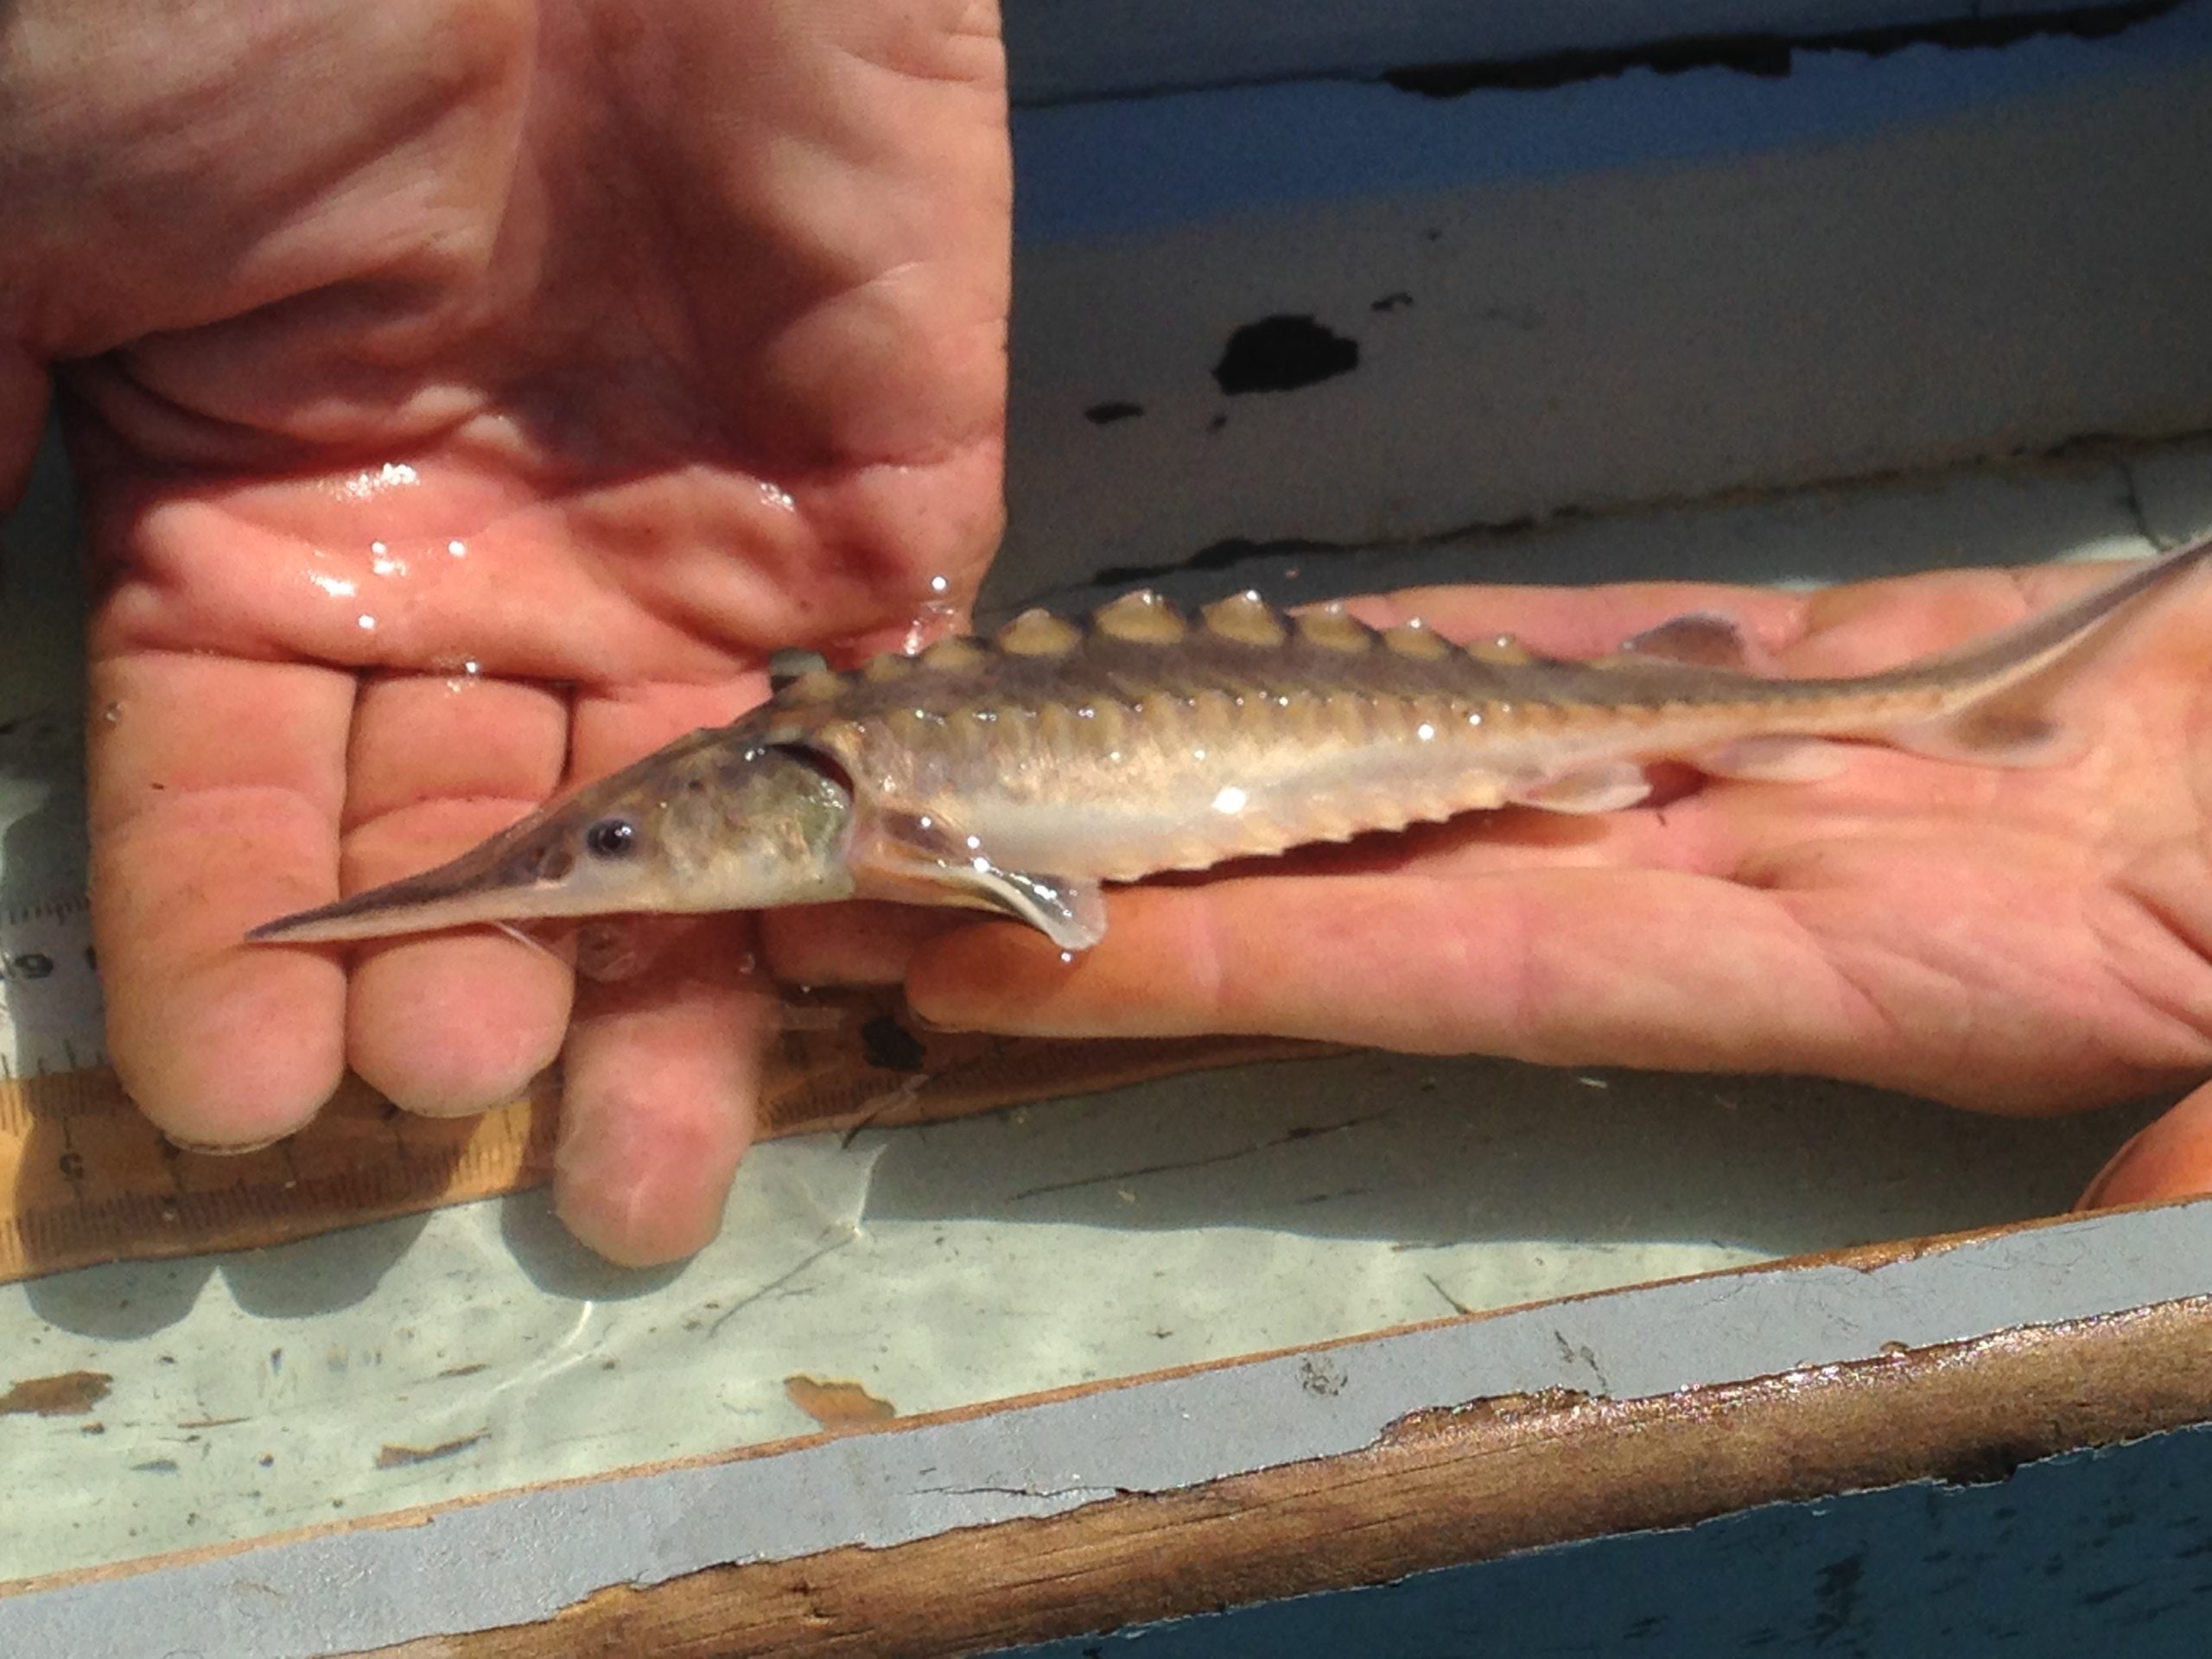 The first-ever Connecticut River born Atlantic sturgeon hatchling, held by hand.